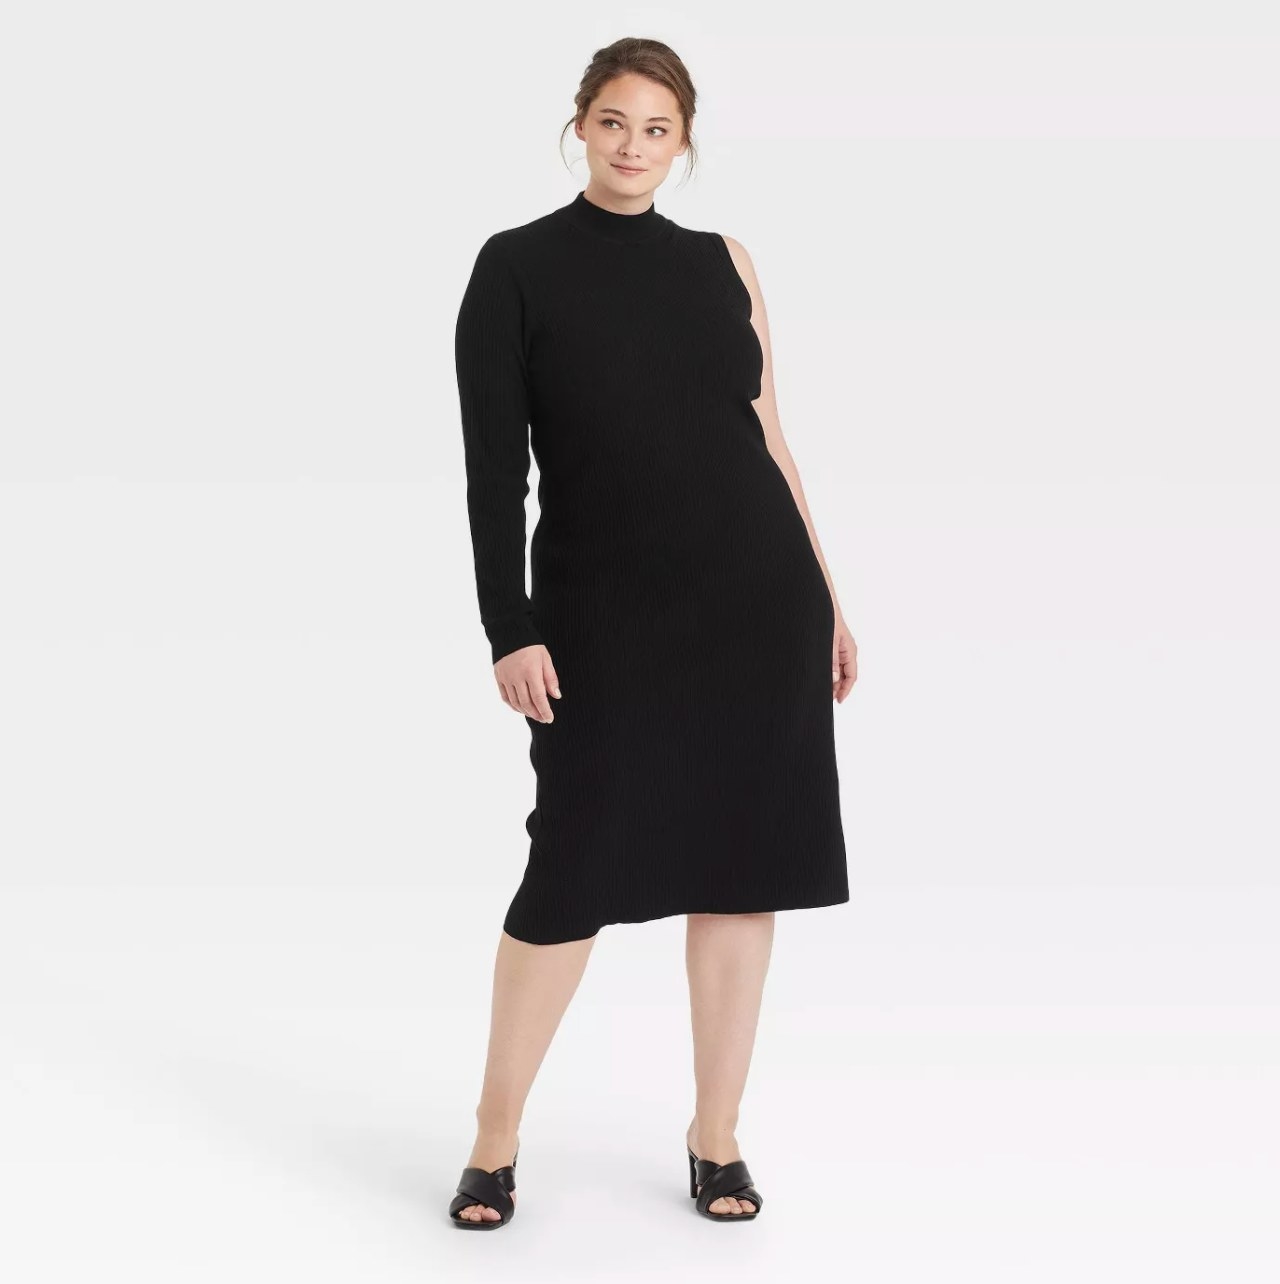 Model in a black midi dress with one long sleeve and one sleeveless